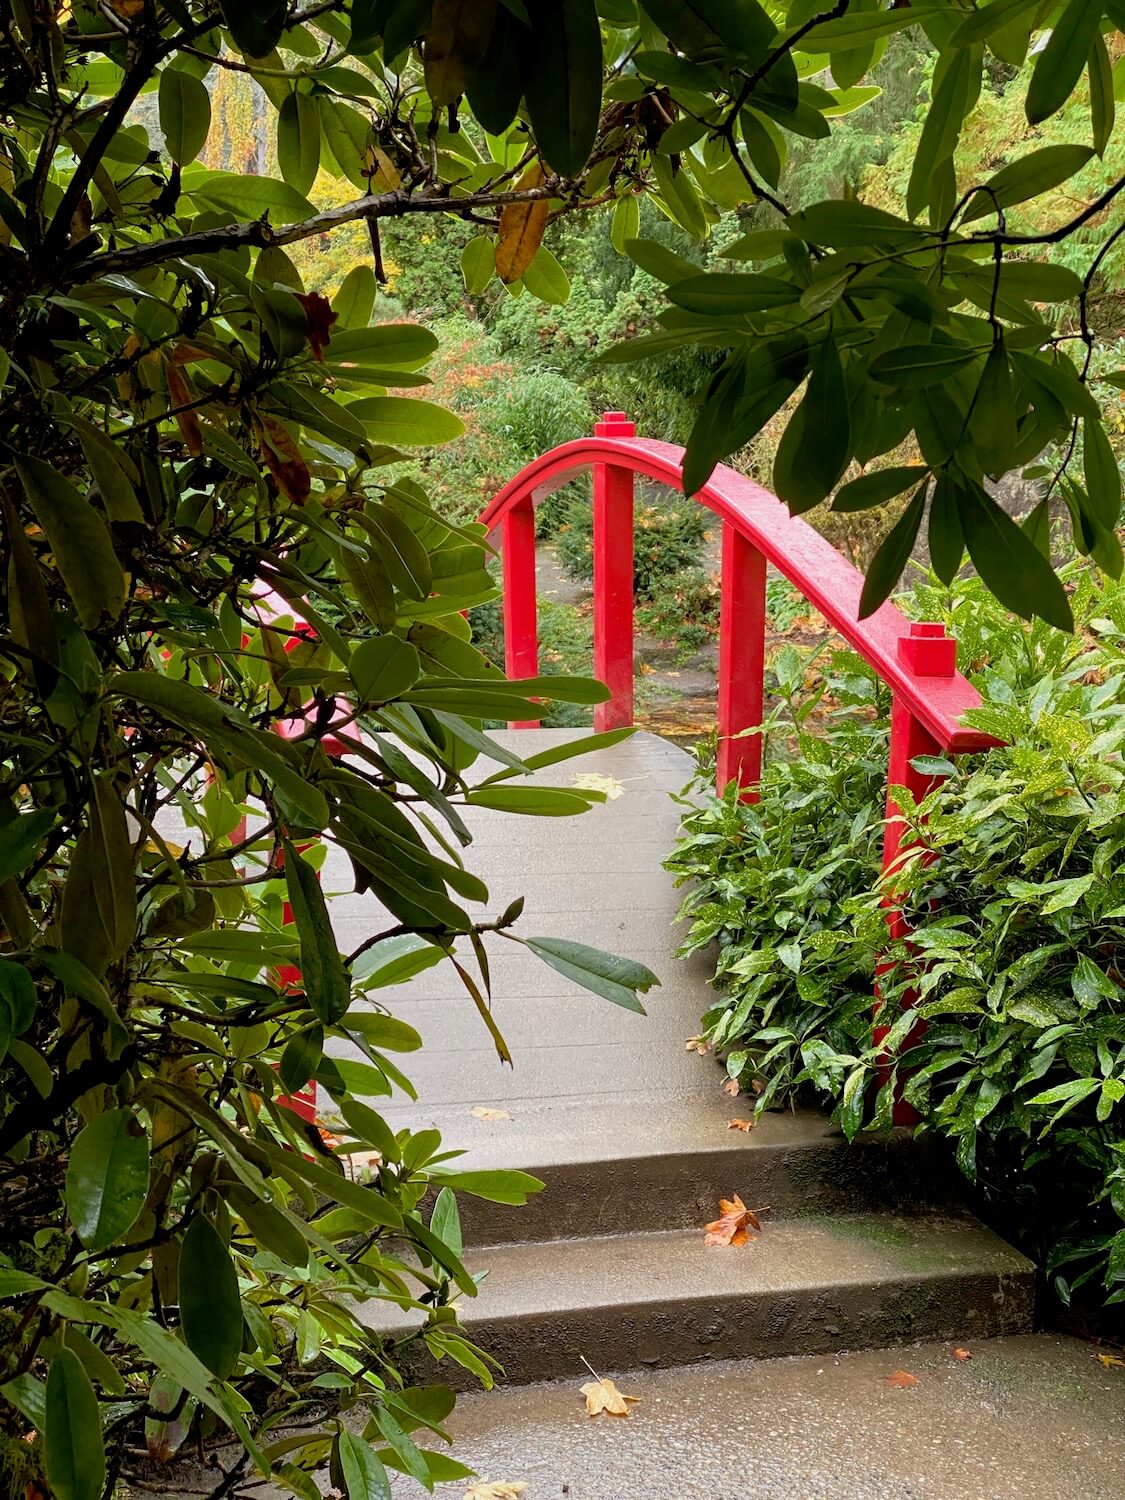 Kubota garden offers a splash of color in the awakening of Spring in Seattle and can be a great outdoor thing to do to connect with nature.  The red bridge is seen from a thicket of lime green rhododendron leaves.